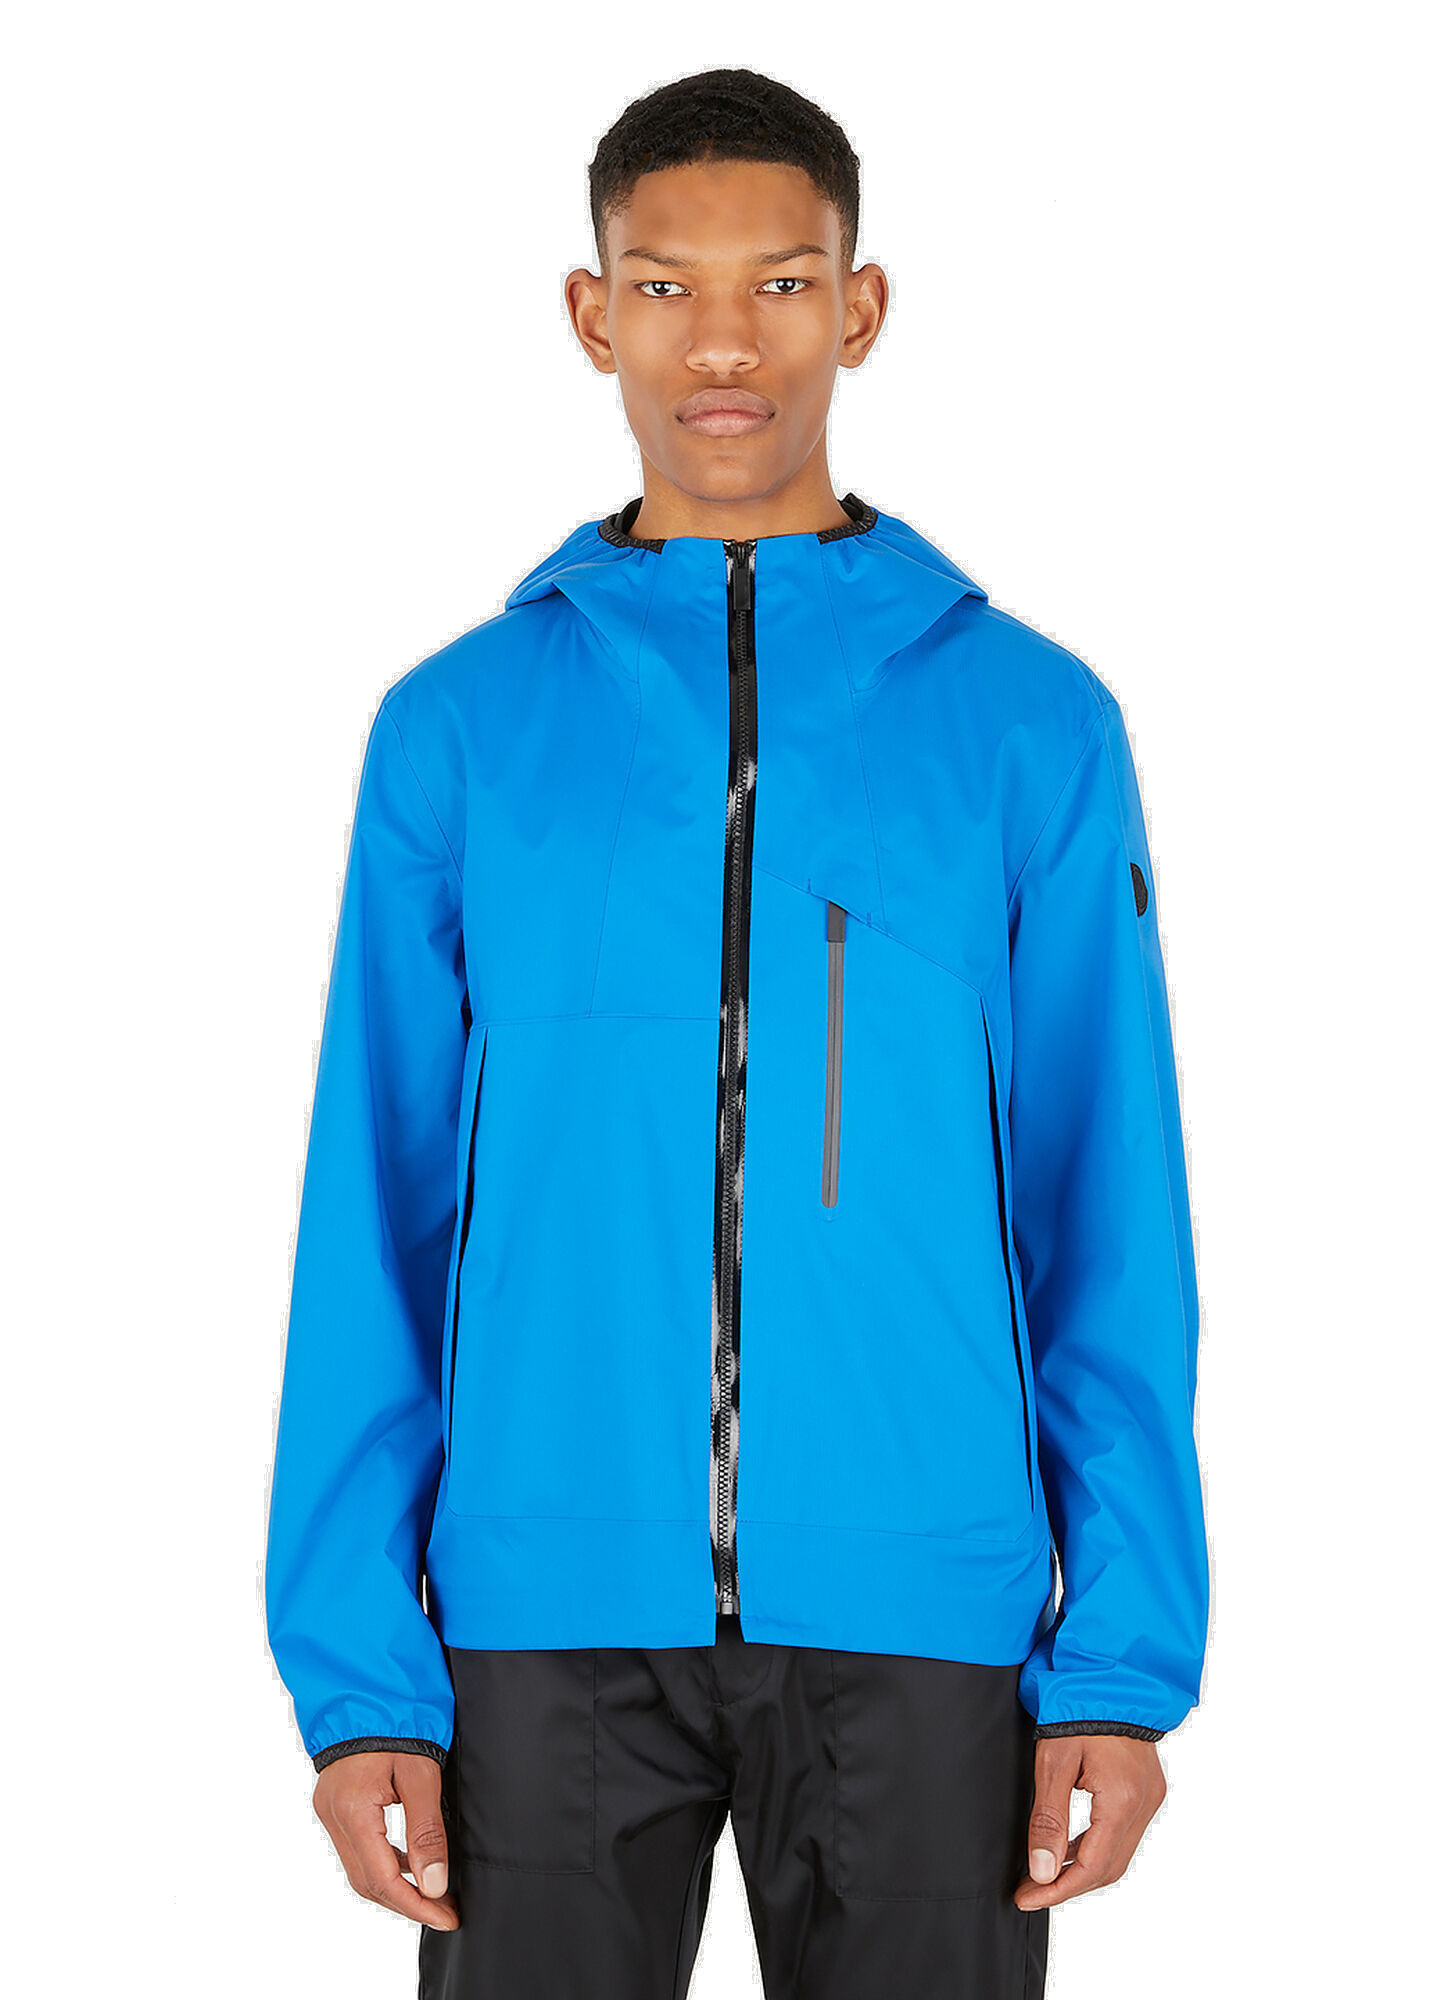 Sattouf Hooded Jacket in Blue Moncler